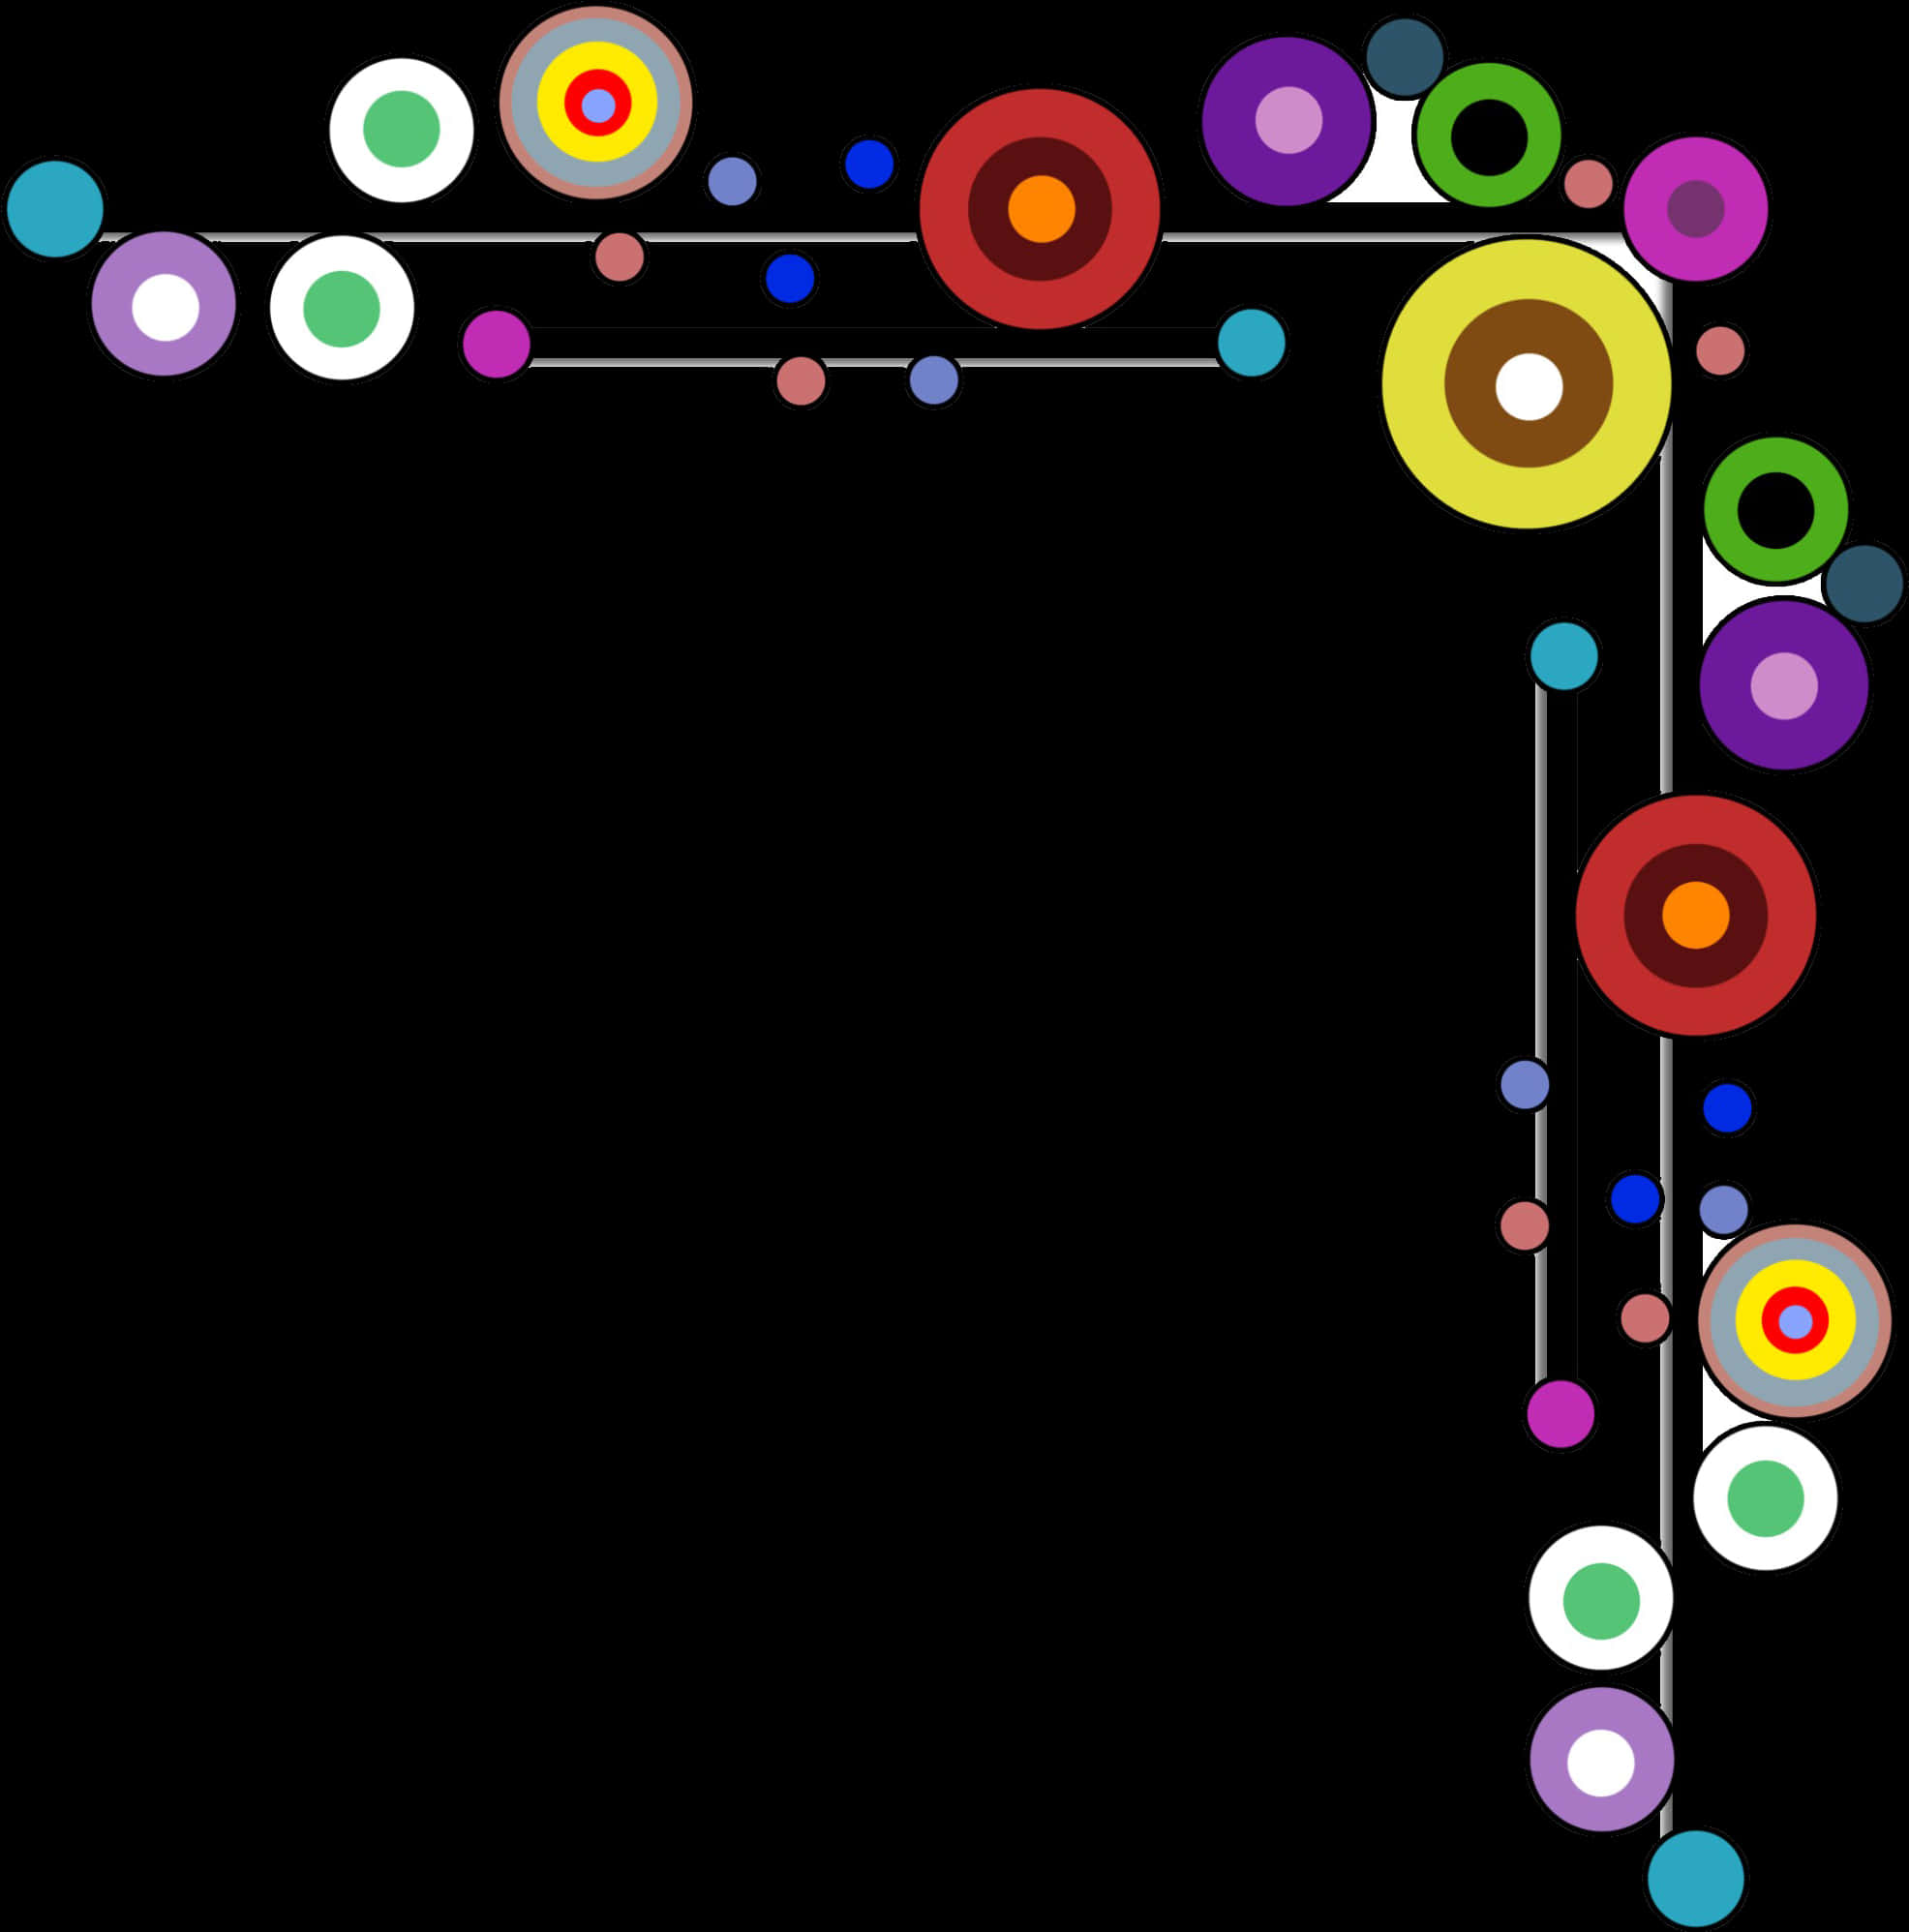 A Colorful Circles And Lines On A Black Background